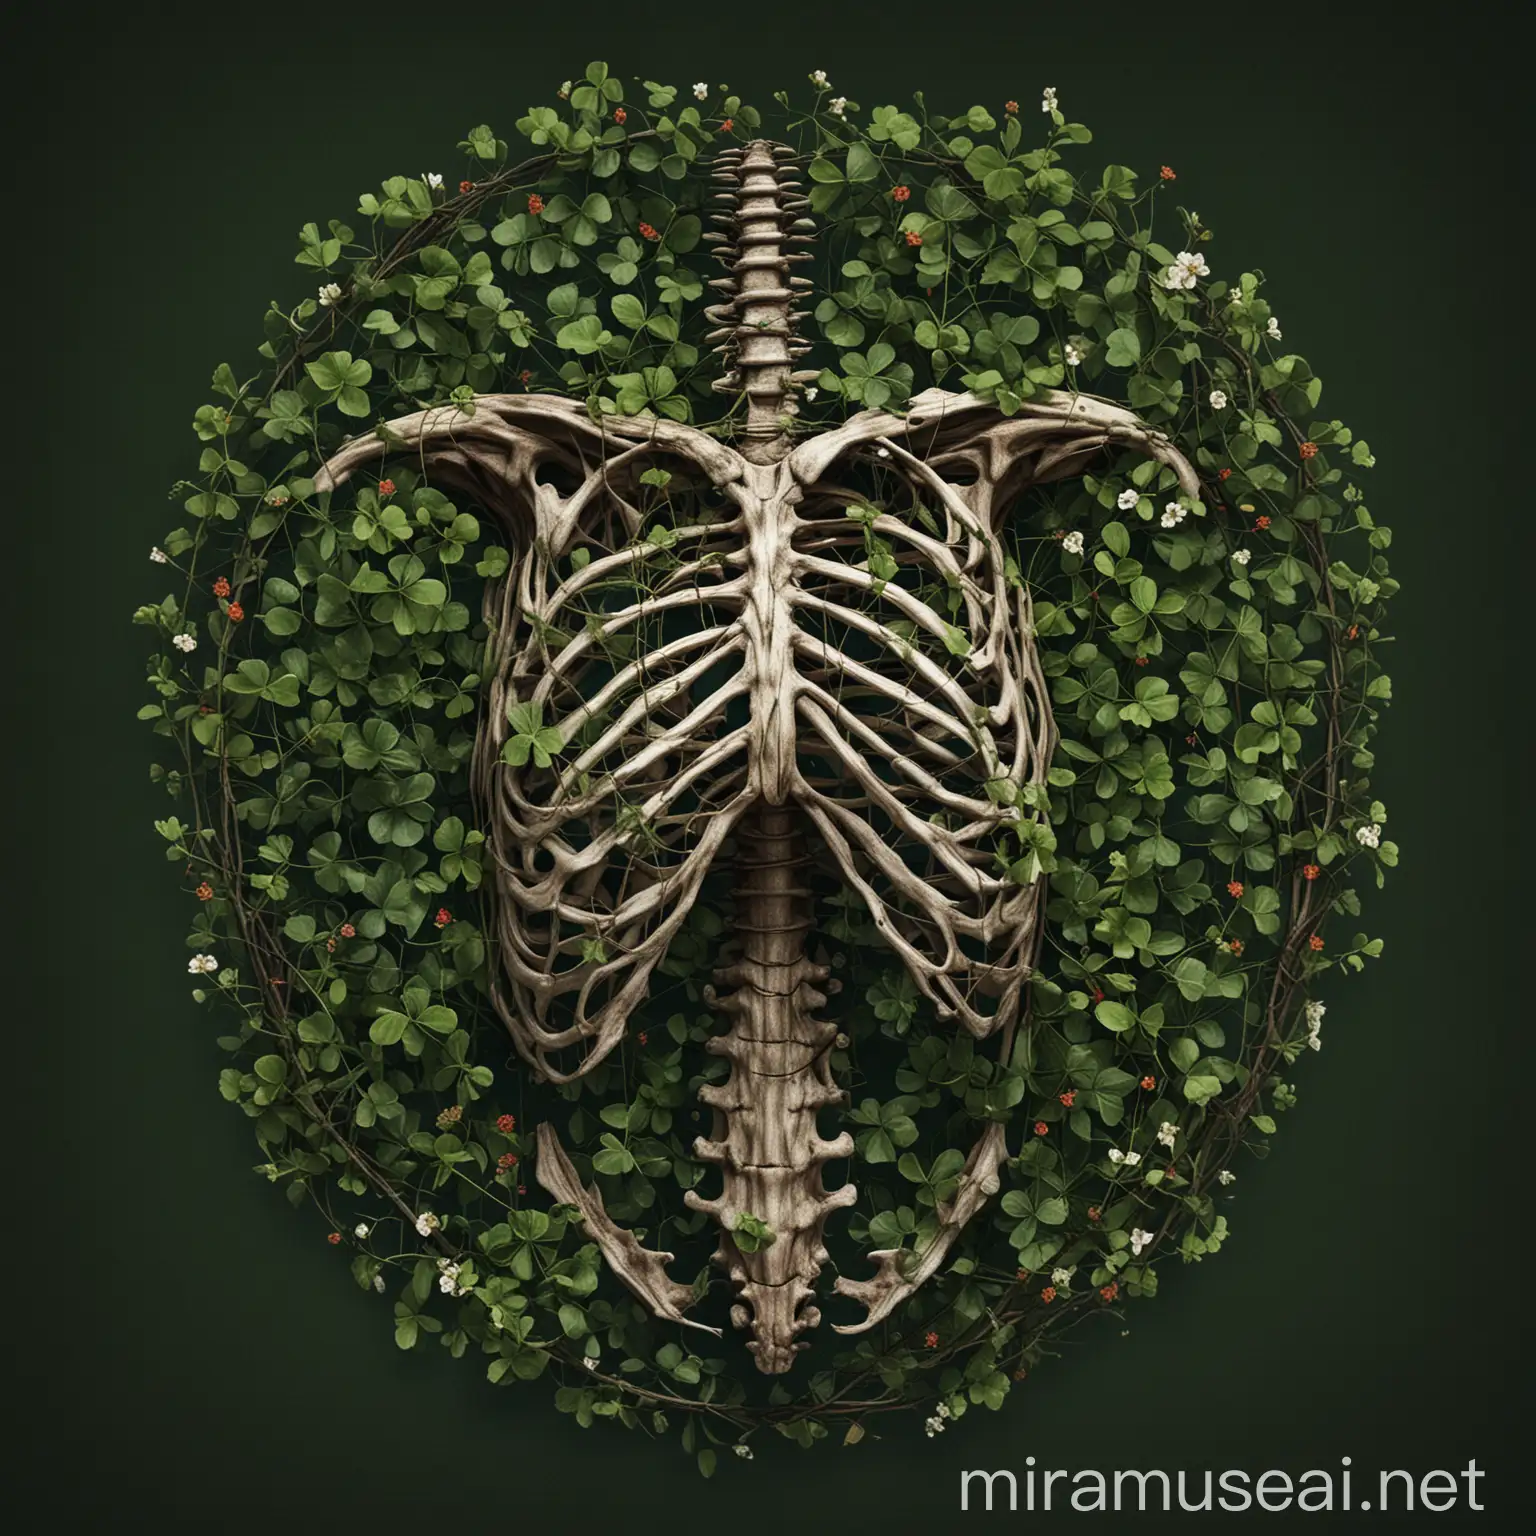 a ribcage full of clovers and thorns